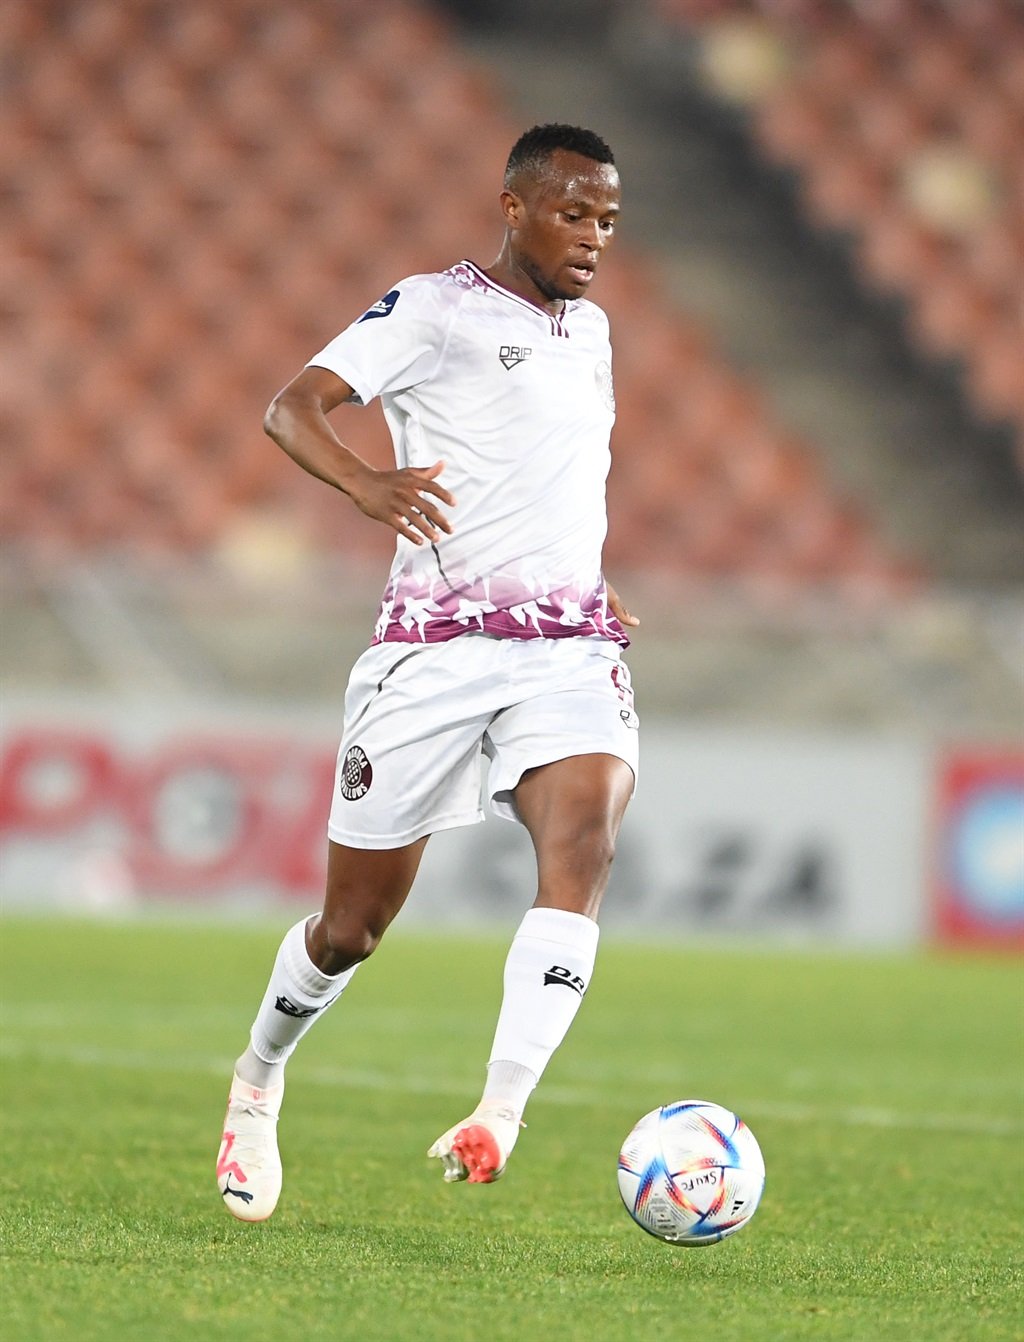 POLOKWANE, SOUTH AFRICA - AUGUST 16: Bongani Sam of Moroka Swallows during the DStv Premiership match between Sekhukhune United and Moroka Swallows at Peter Mokaba Stadium on August 16, 2023 in Polokwane, South Africa. (Photo by Philip Maeta/Gallo Images)